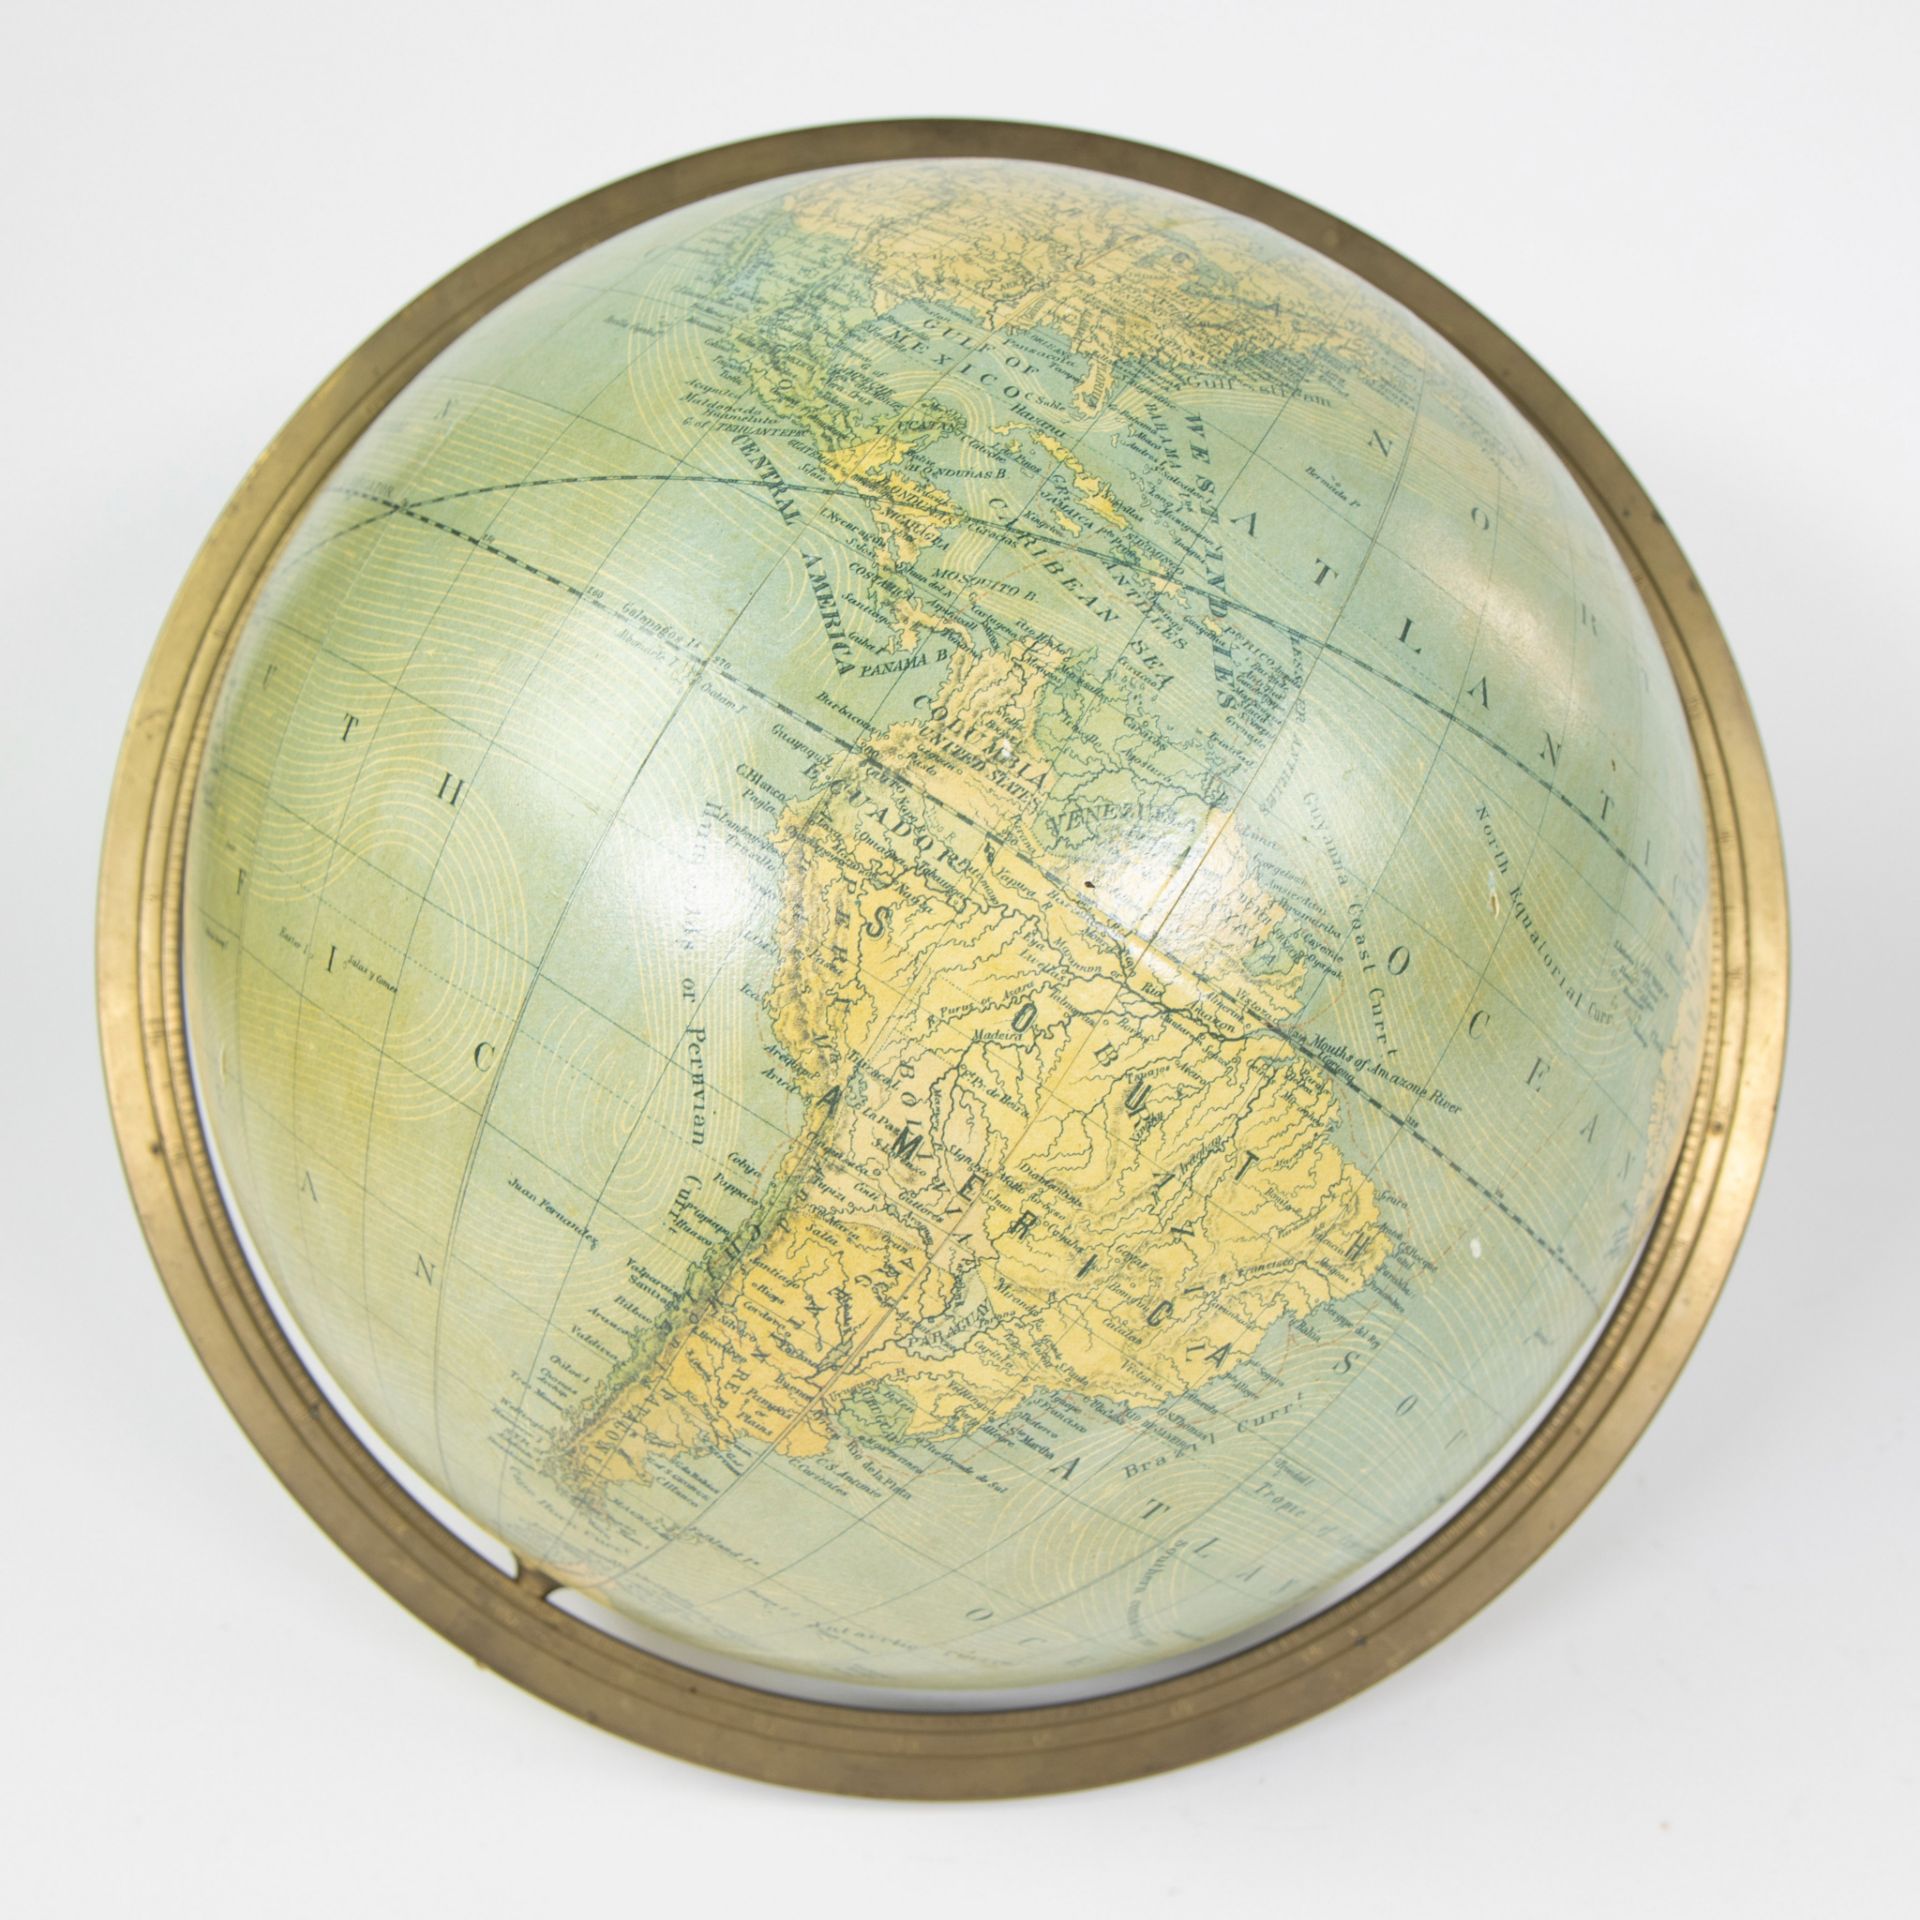 Vintage Merzbach and Falk physical and Political globe on stand, Geographical Institute of Brussels - Image 7 of 7